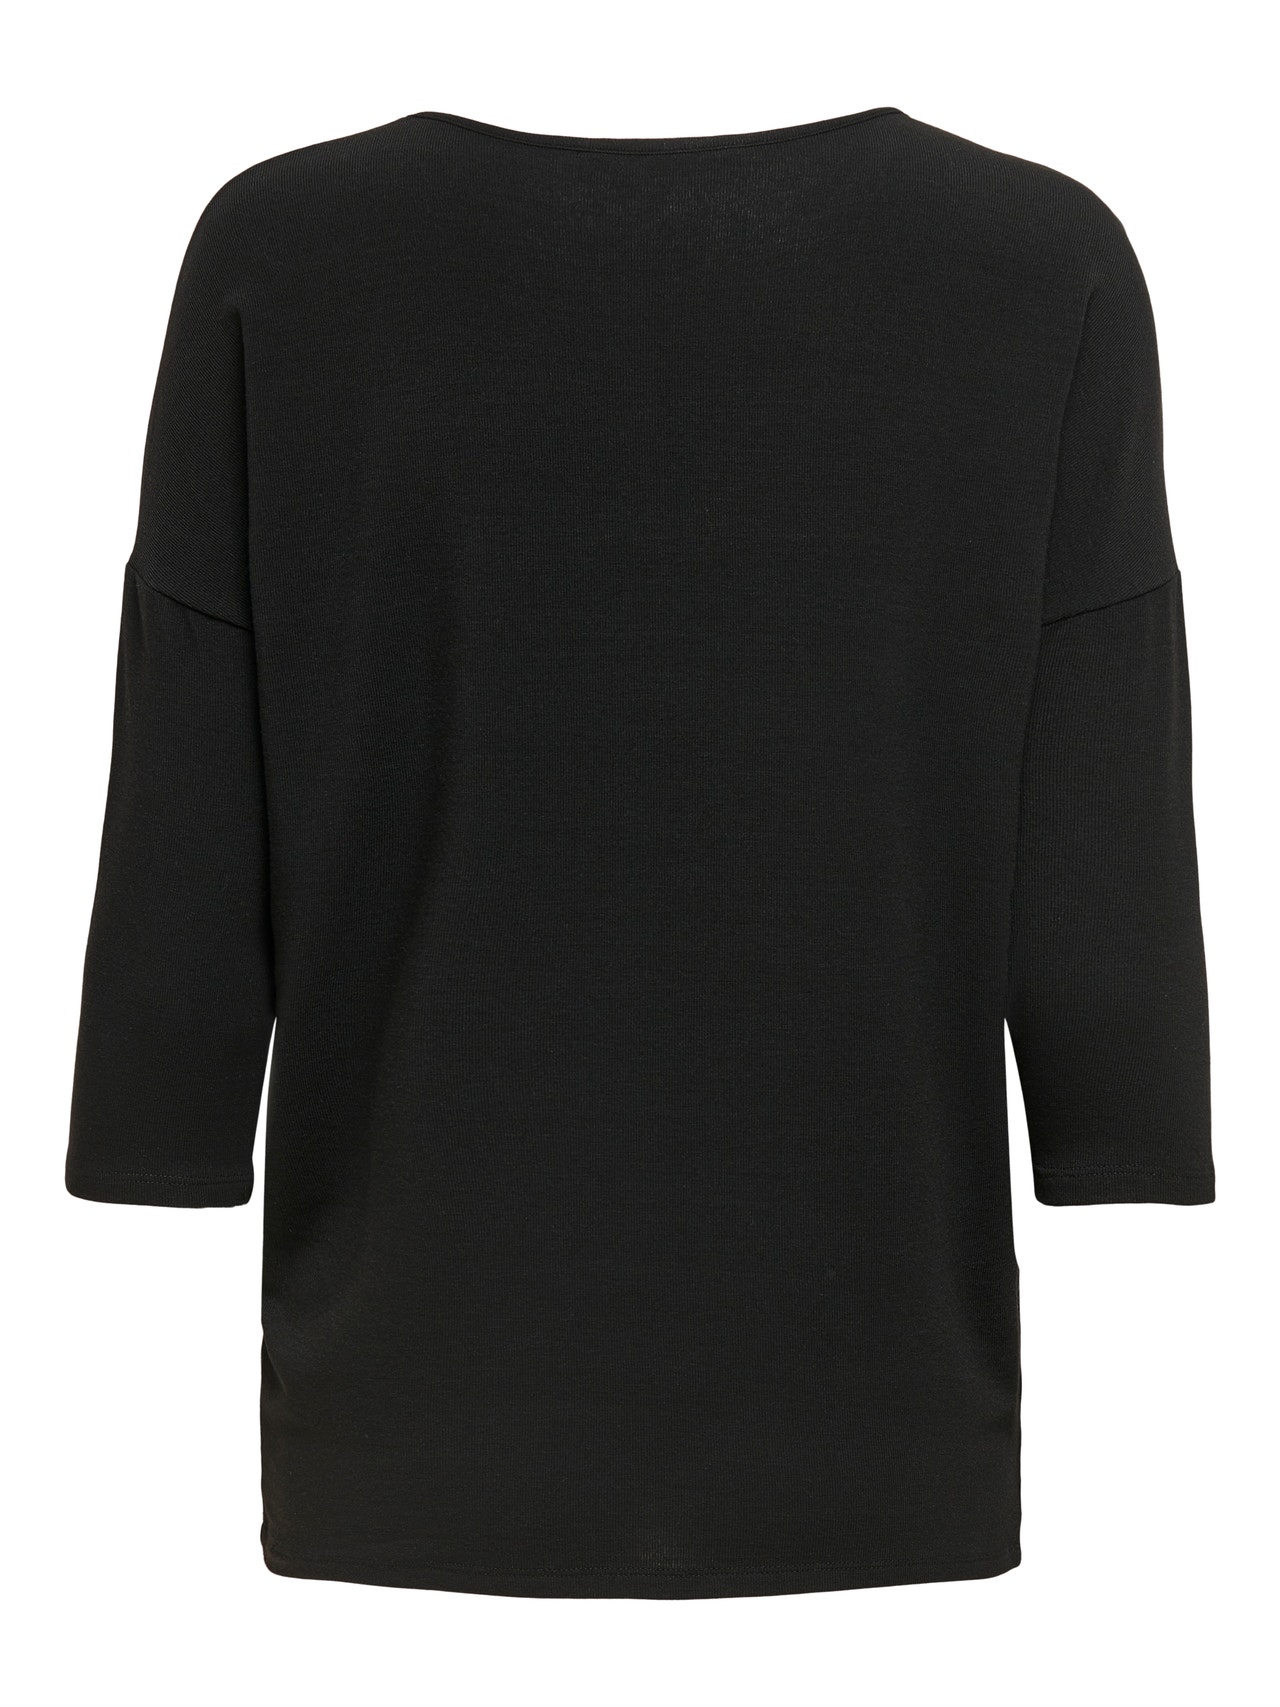 ONLY Loose Fit Round Neck Dropped shoulders Top -Black - 15157920